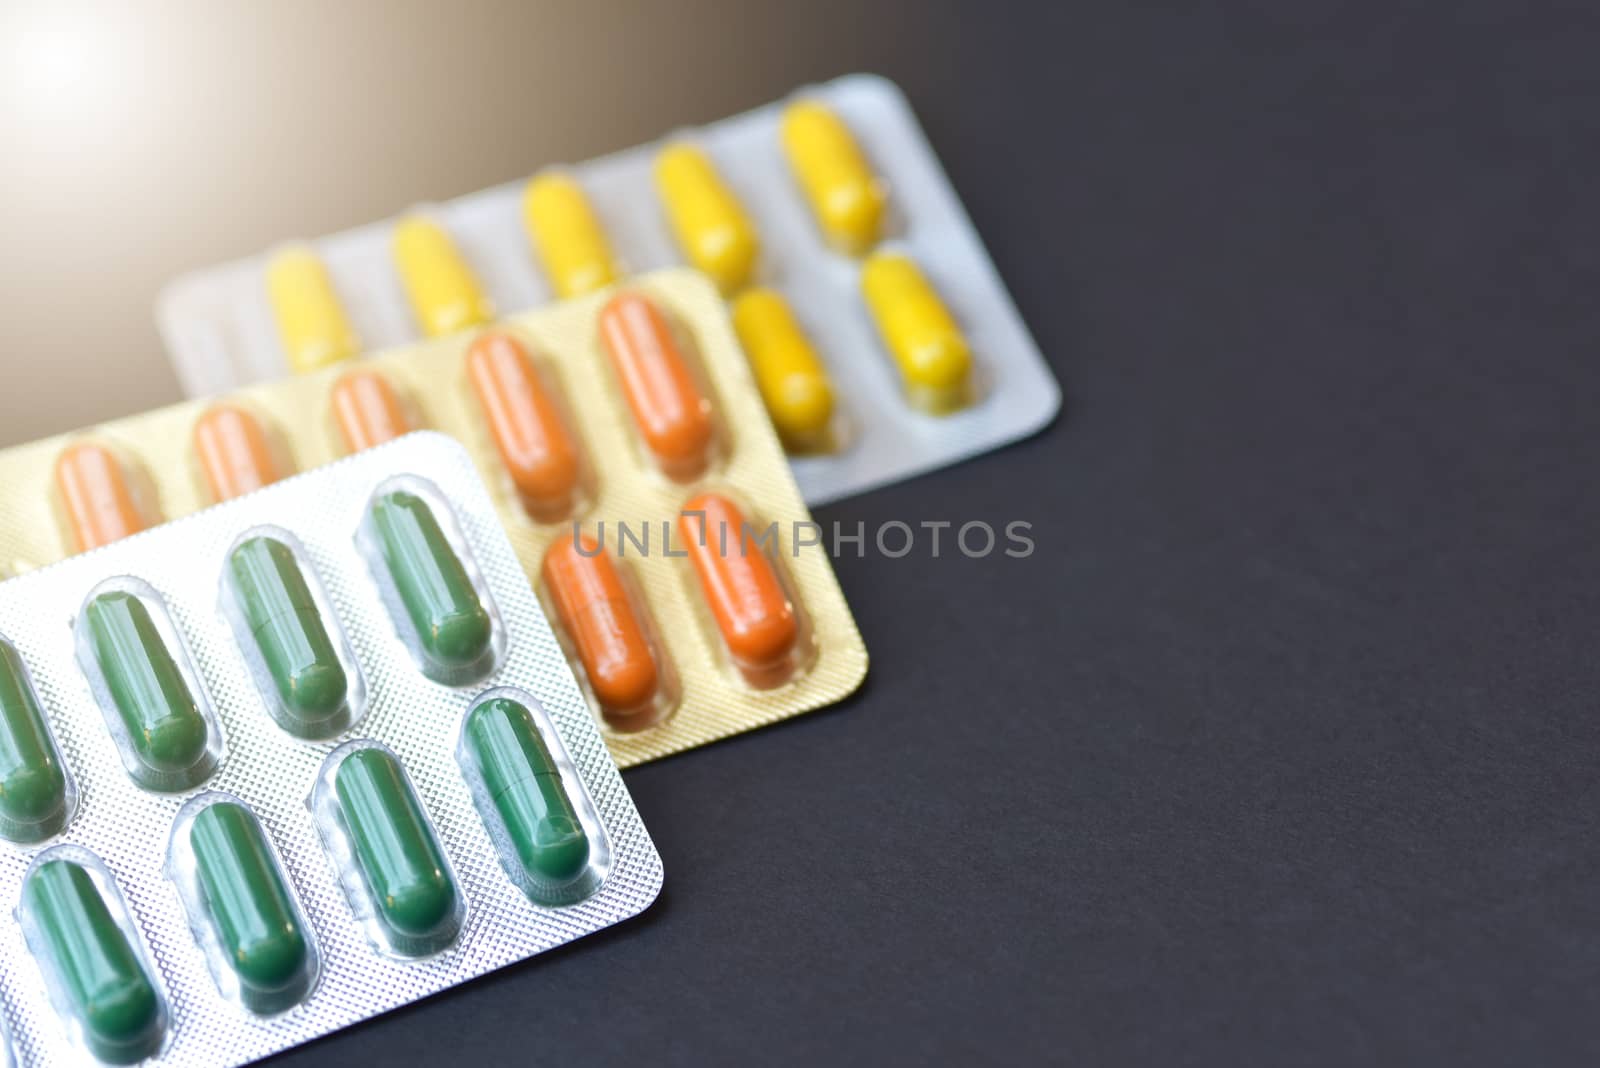 Pharmaceutical capsules pills in blisters packaging isolated on Black background with copy space for text. Thai herbal medicine for anti inflammatory, muscle relaxant and pain. selective focus